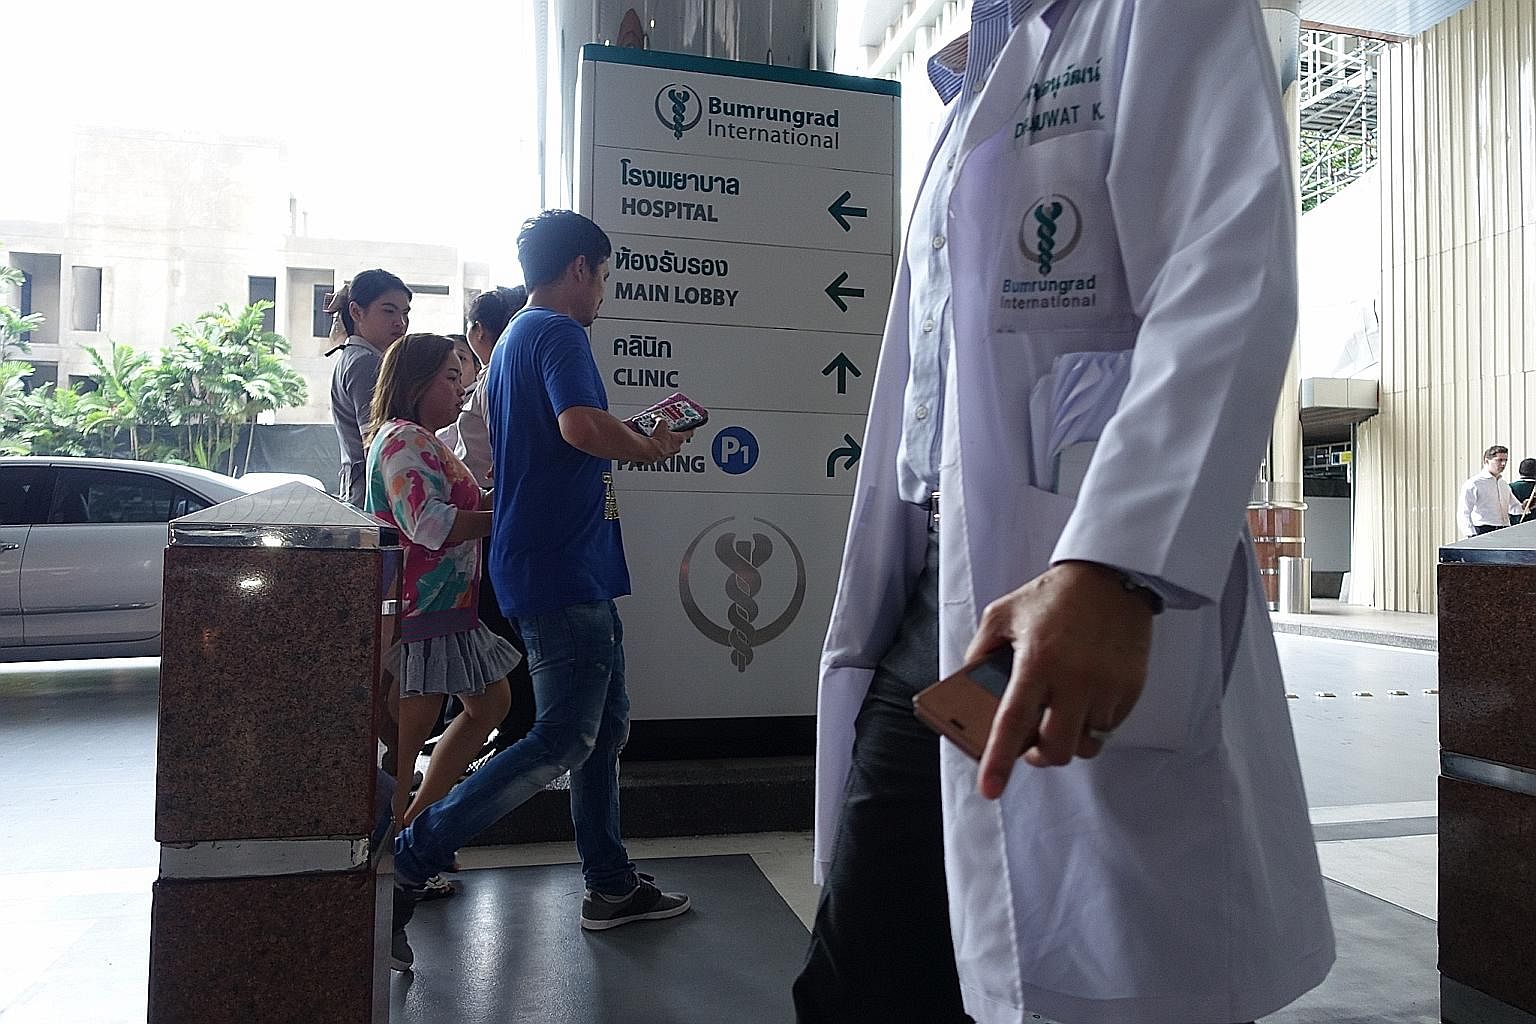 Bumrungrad International Hospital in central Bangkok, one of the most profitable private hospitals in Thailand. Despite mutual recognition agreements that commit Thailand to recognising the qualifications of professionals from other countries, doctor